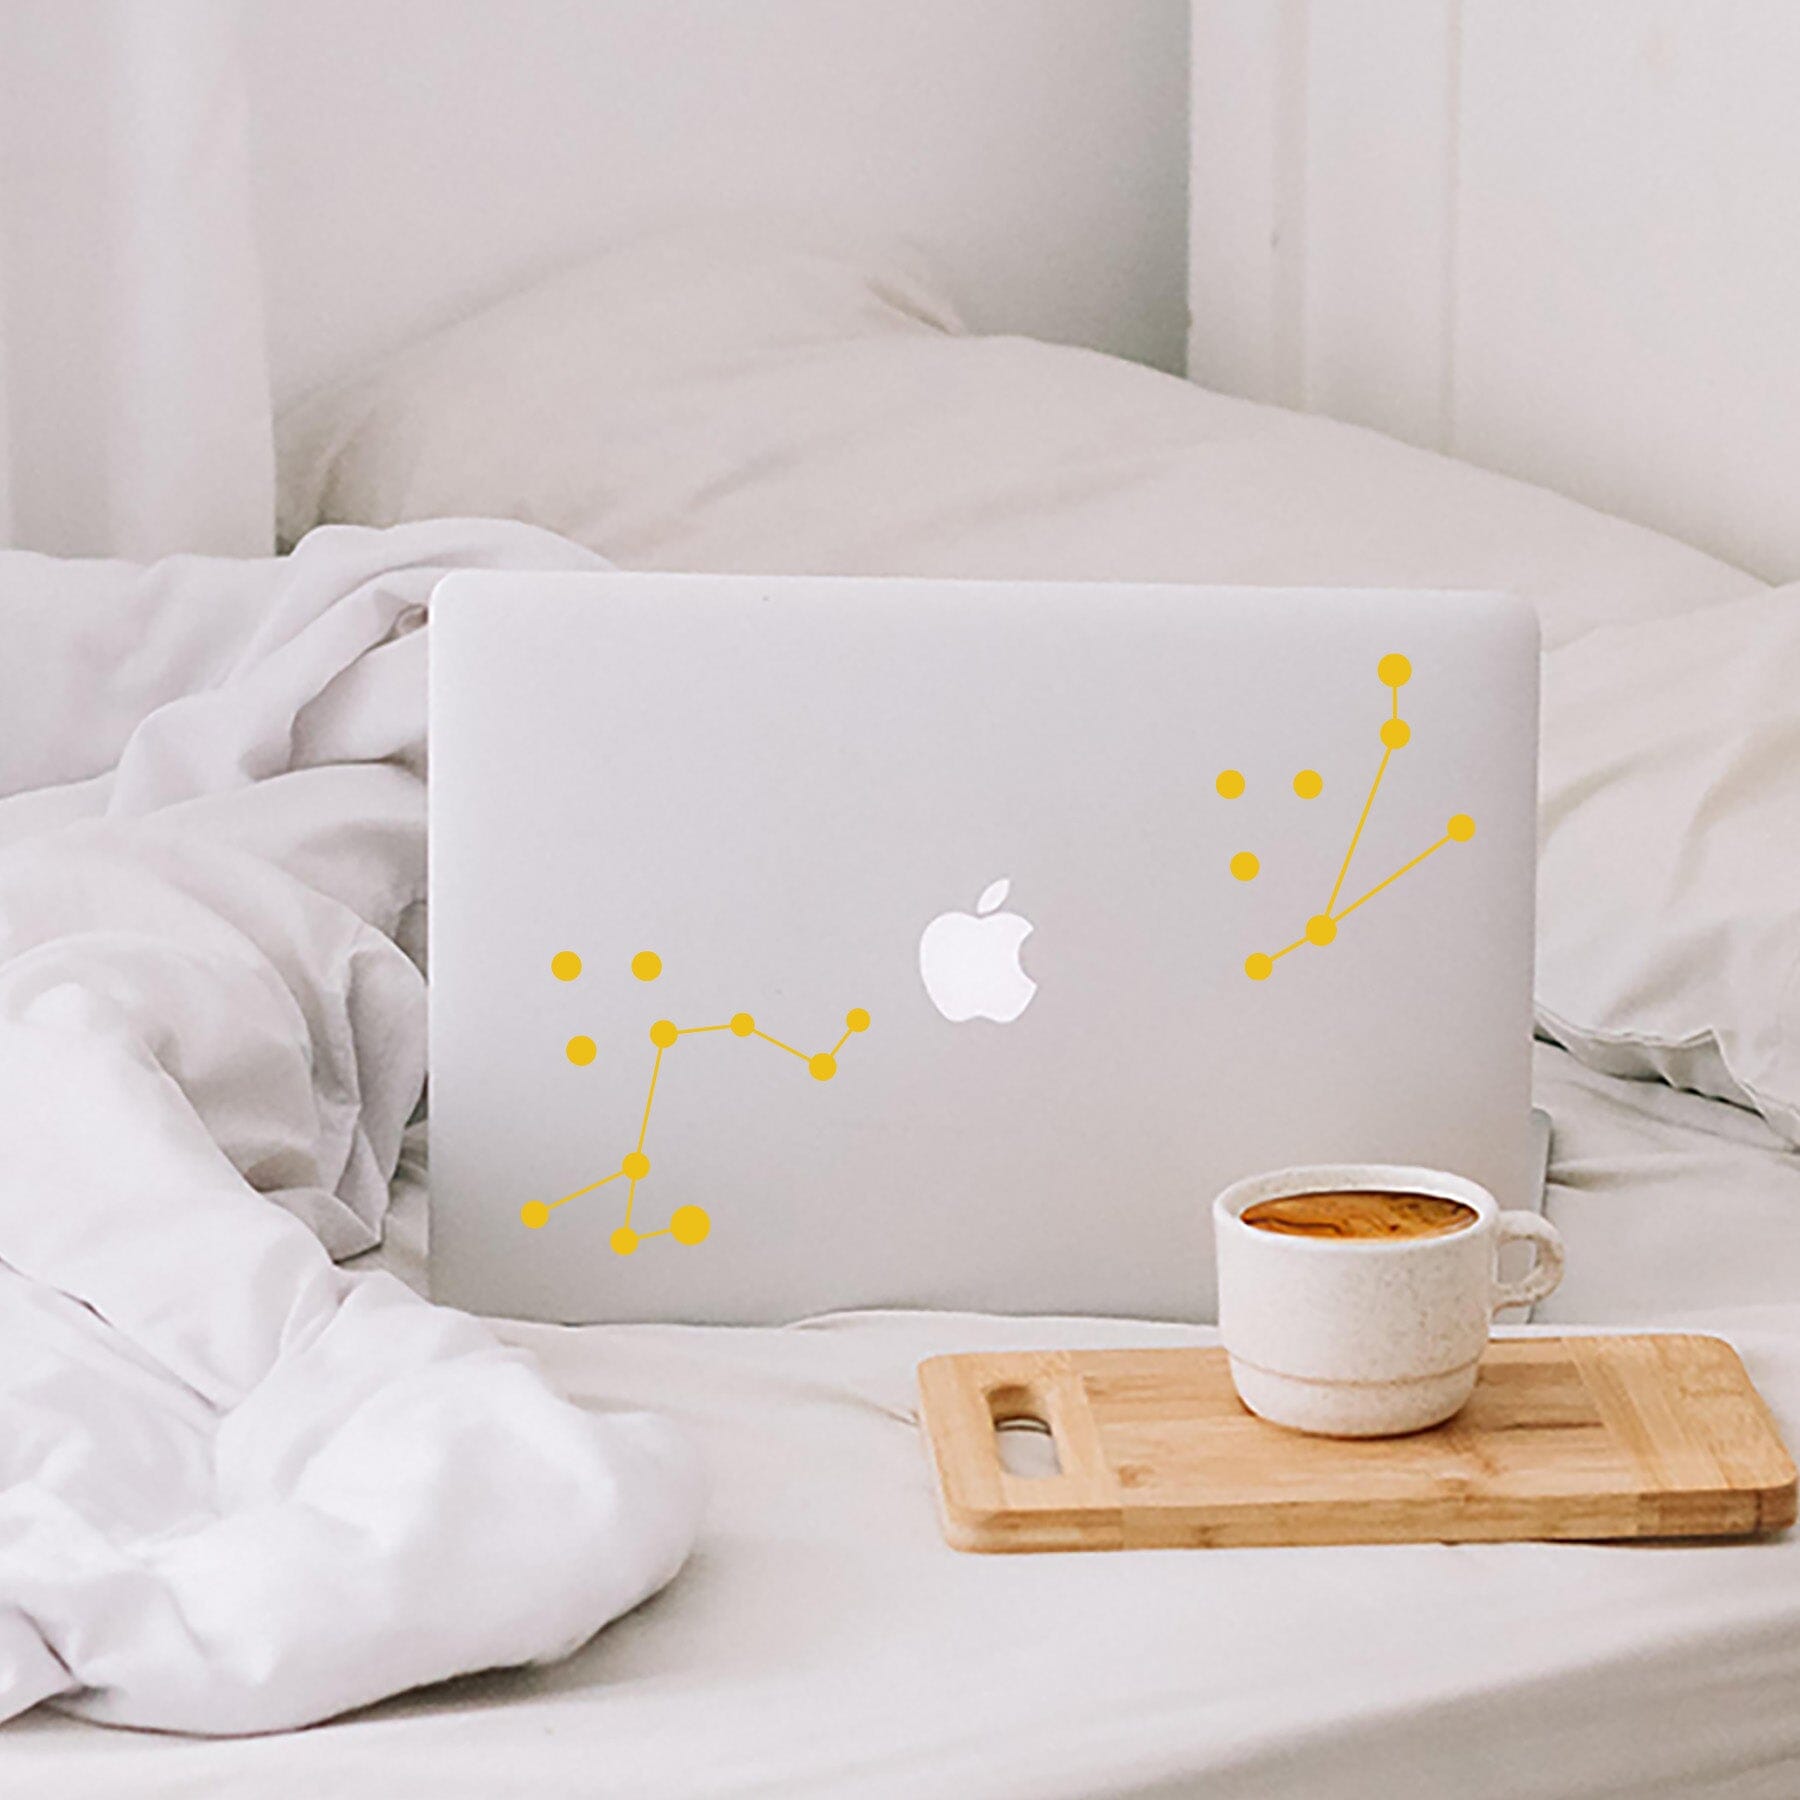 constellation wall decals - wall art - stickers - wall decor - signal yellow